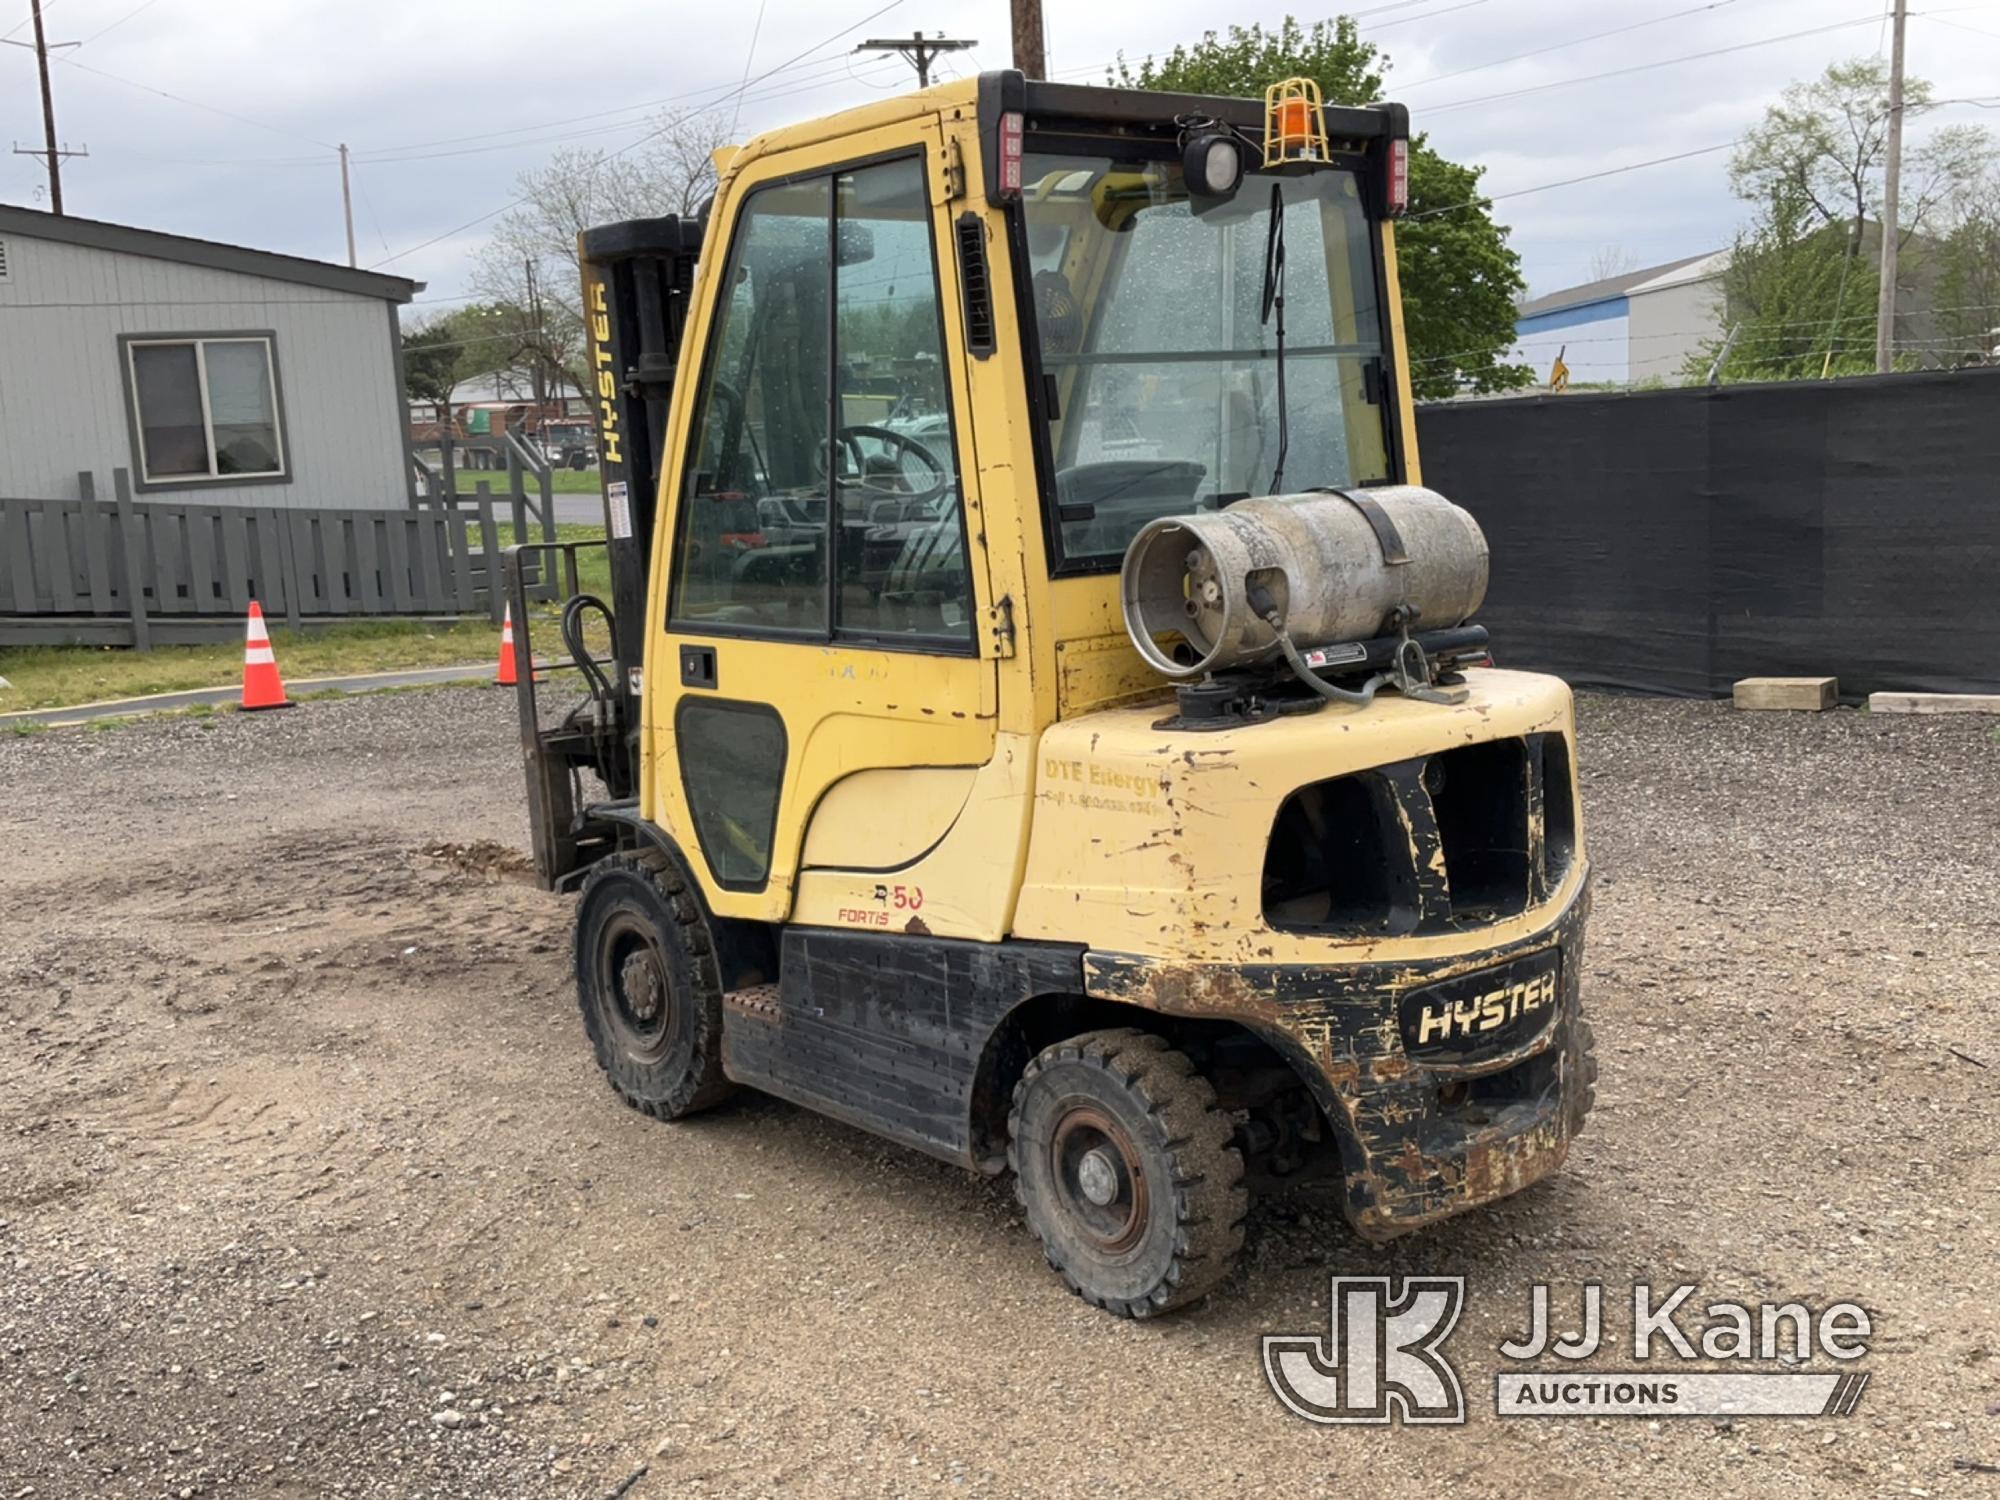 (Charlotte, MI) 2005 Hyster H50FT Rubber Tired Forklift Runs, Moves, Operates, Jump to Start, LP Tan